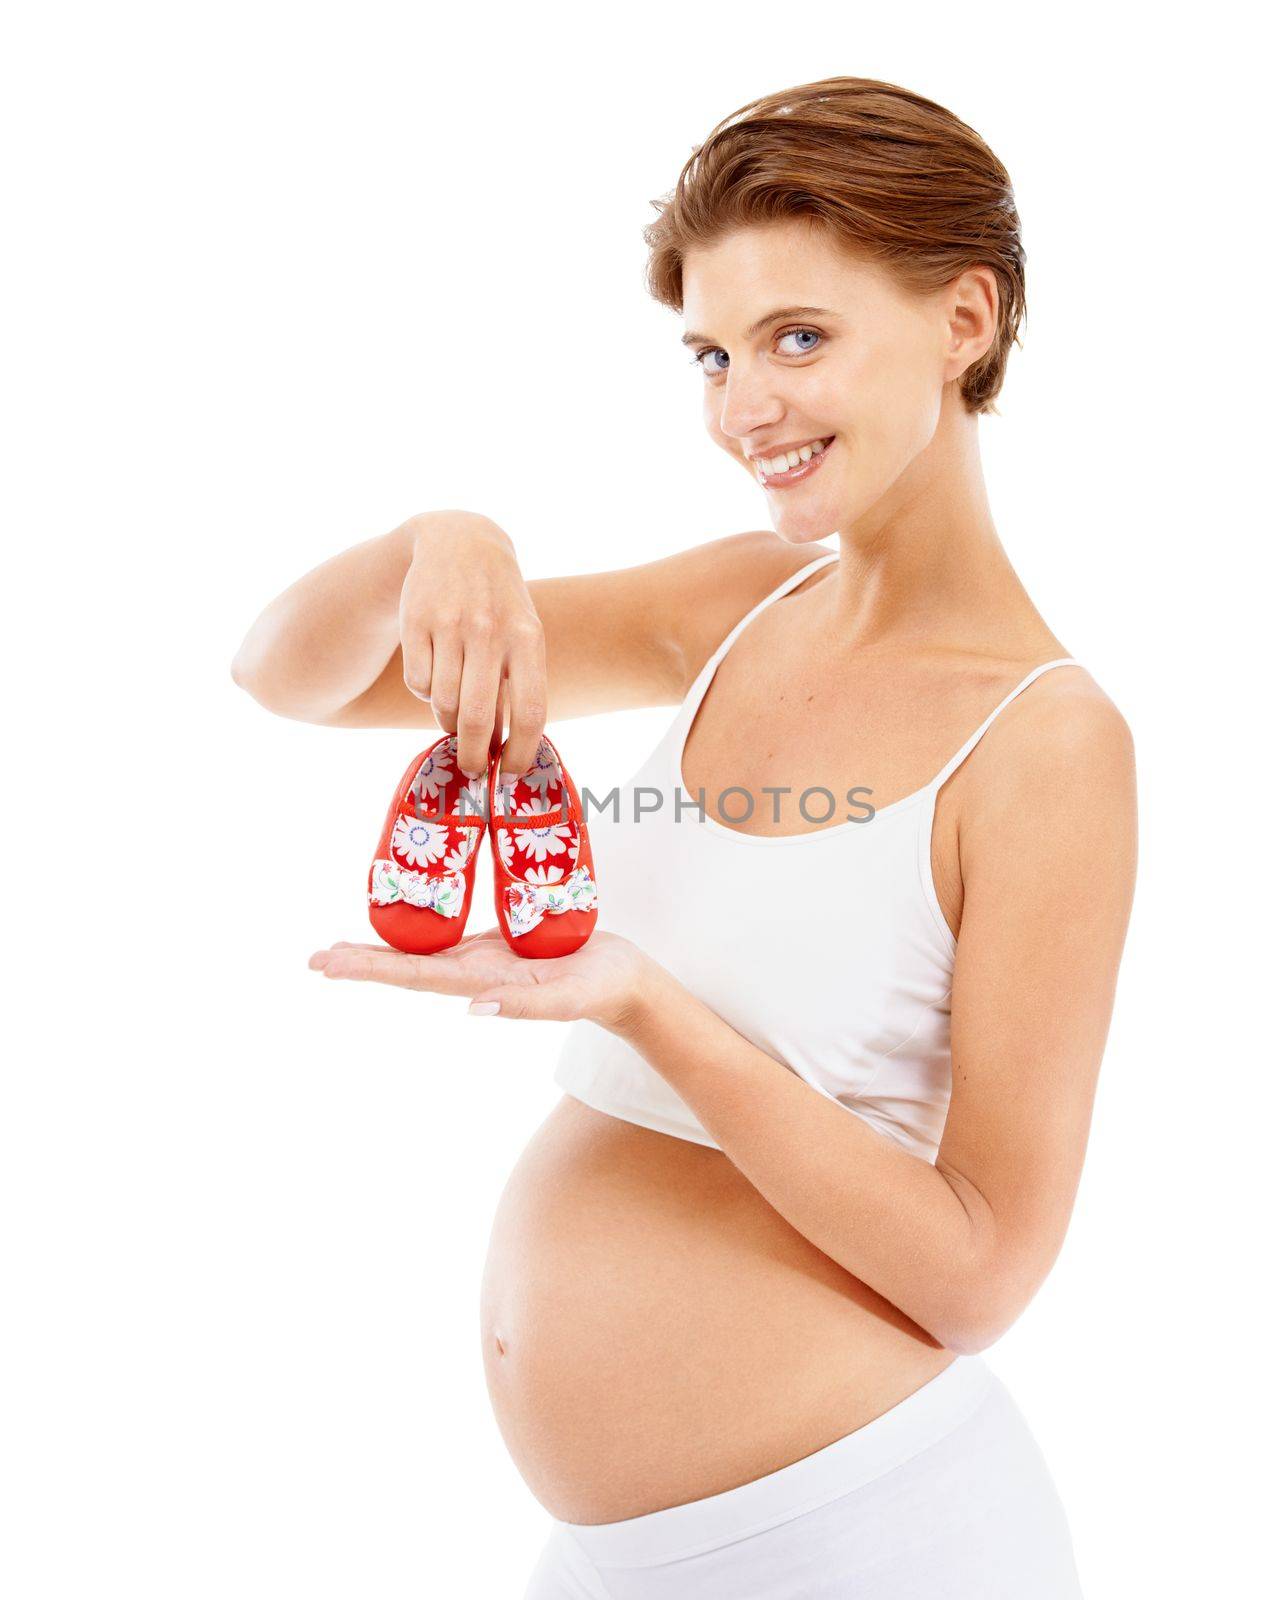 Baby shoes, pregnant woman and mother portrait with happy smile and pregnancy stomach. Young, healthy and happiness of a mom excited about clothing for babies and motherhood family care for child.